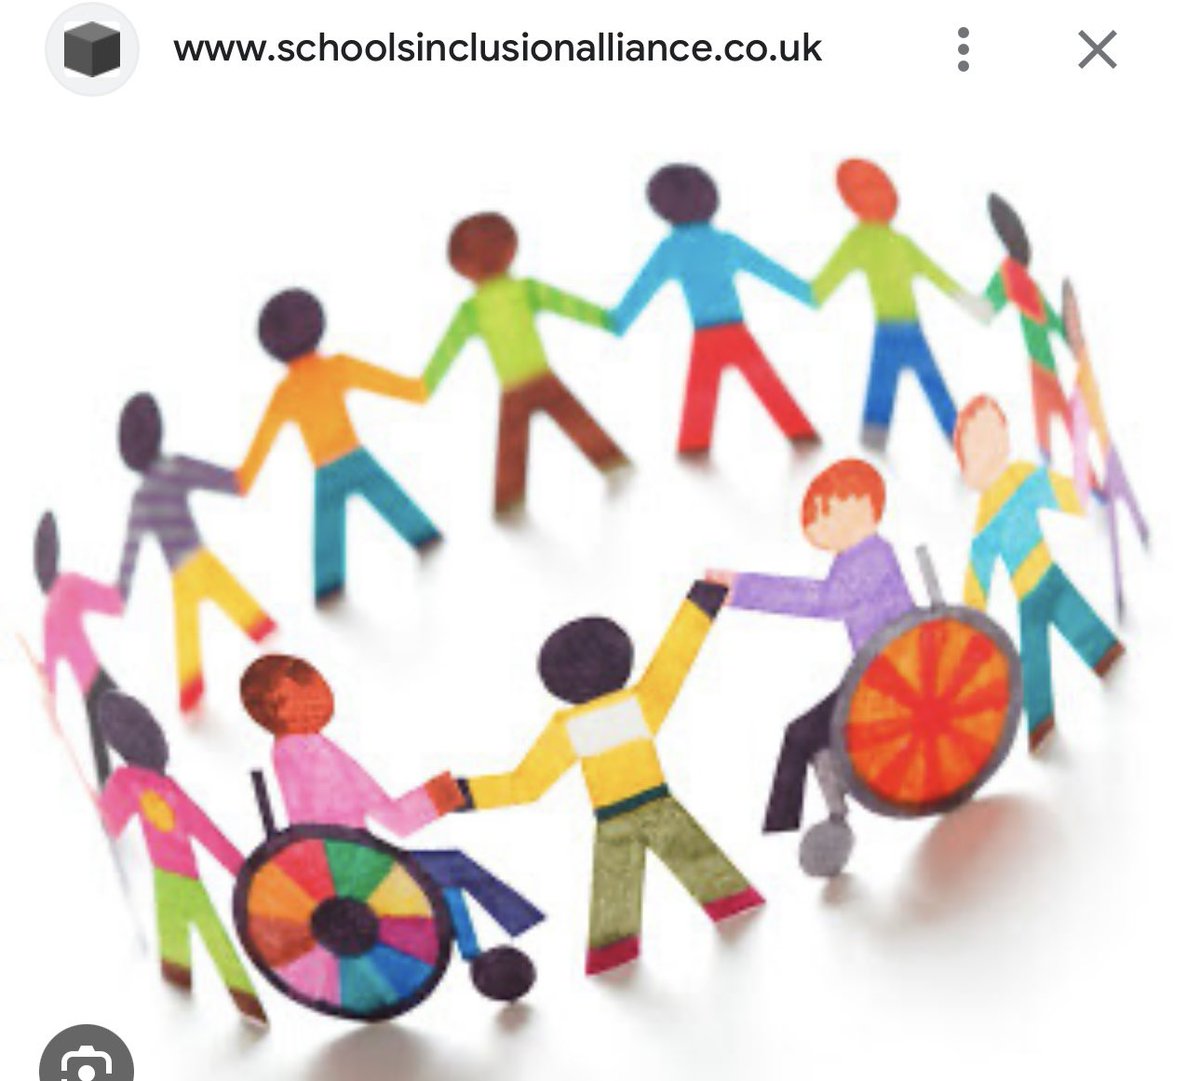 Simple analogy for #InclusionWeek
 
It’s not enough that we invite those that doesn’t look, act & think like us in ‘celebrating our differences’ party,

Its also 2 ensure they are offered food, asked to dance & in the end thank them for coming! 
#actionsnotwords
#InclusionMatters